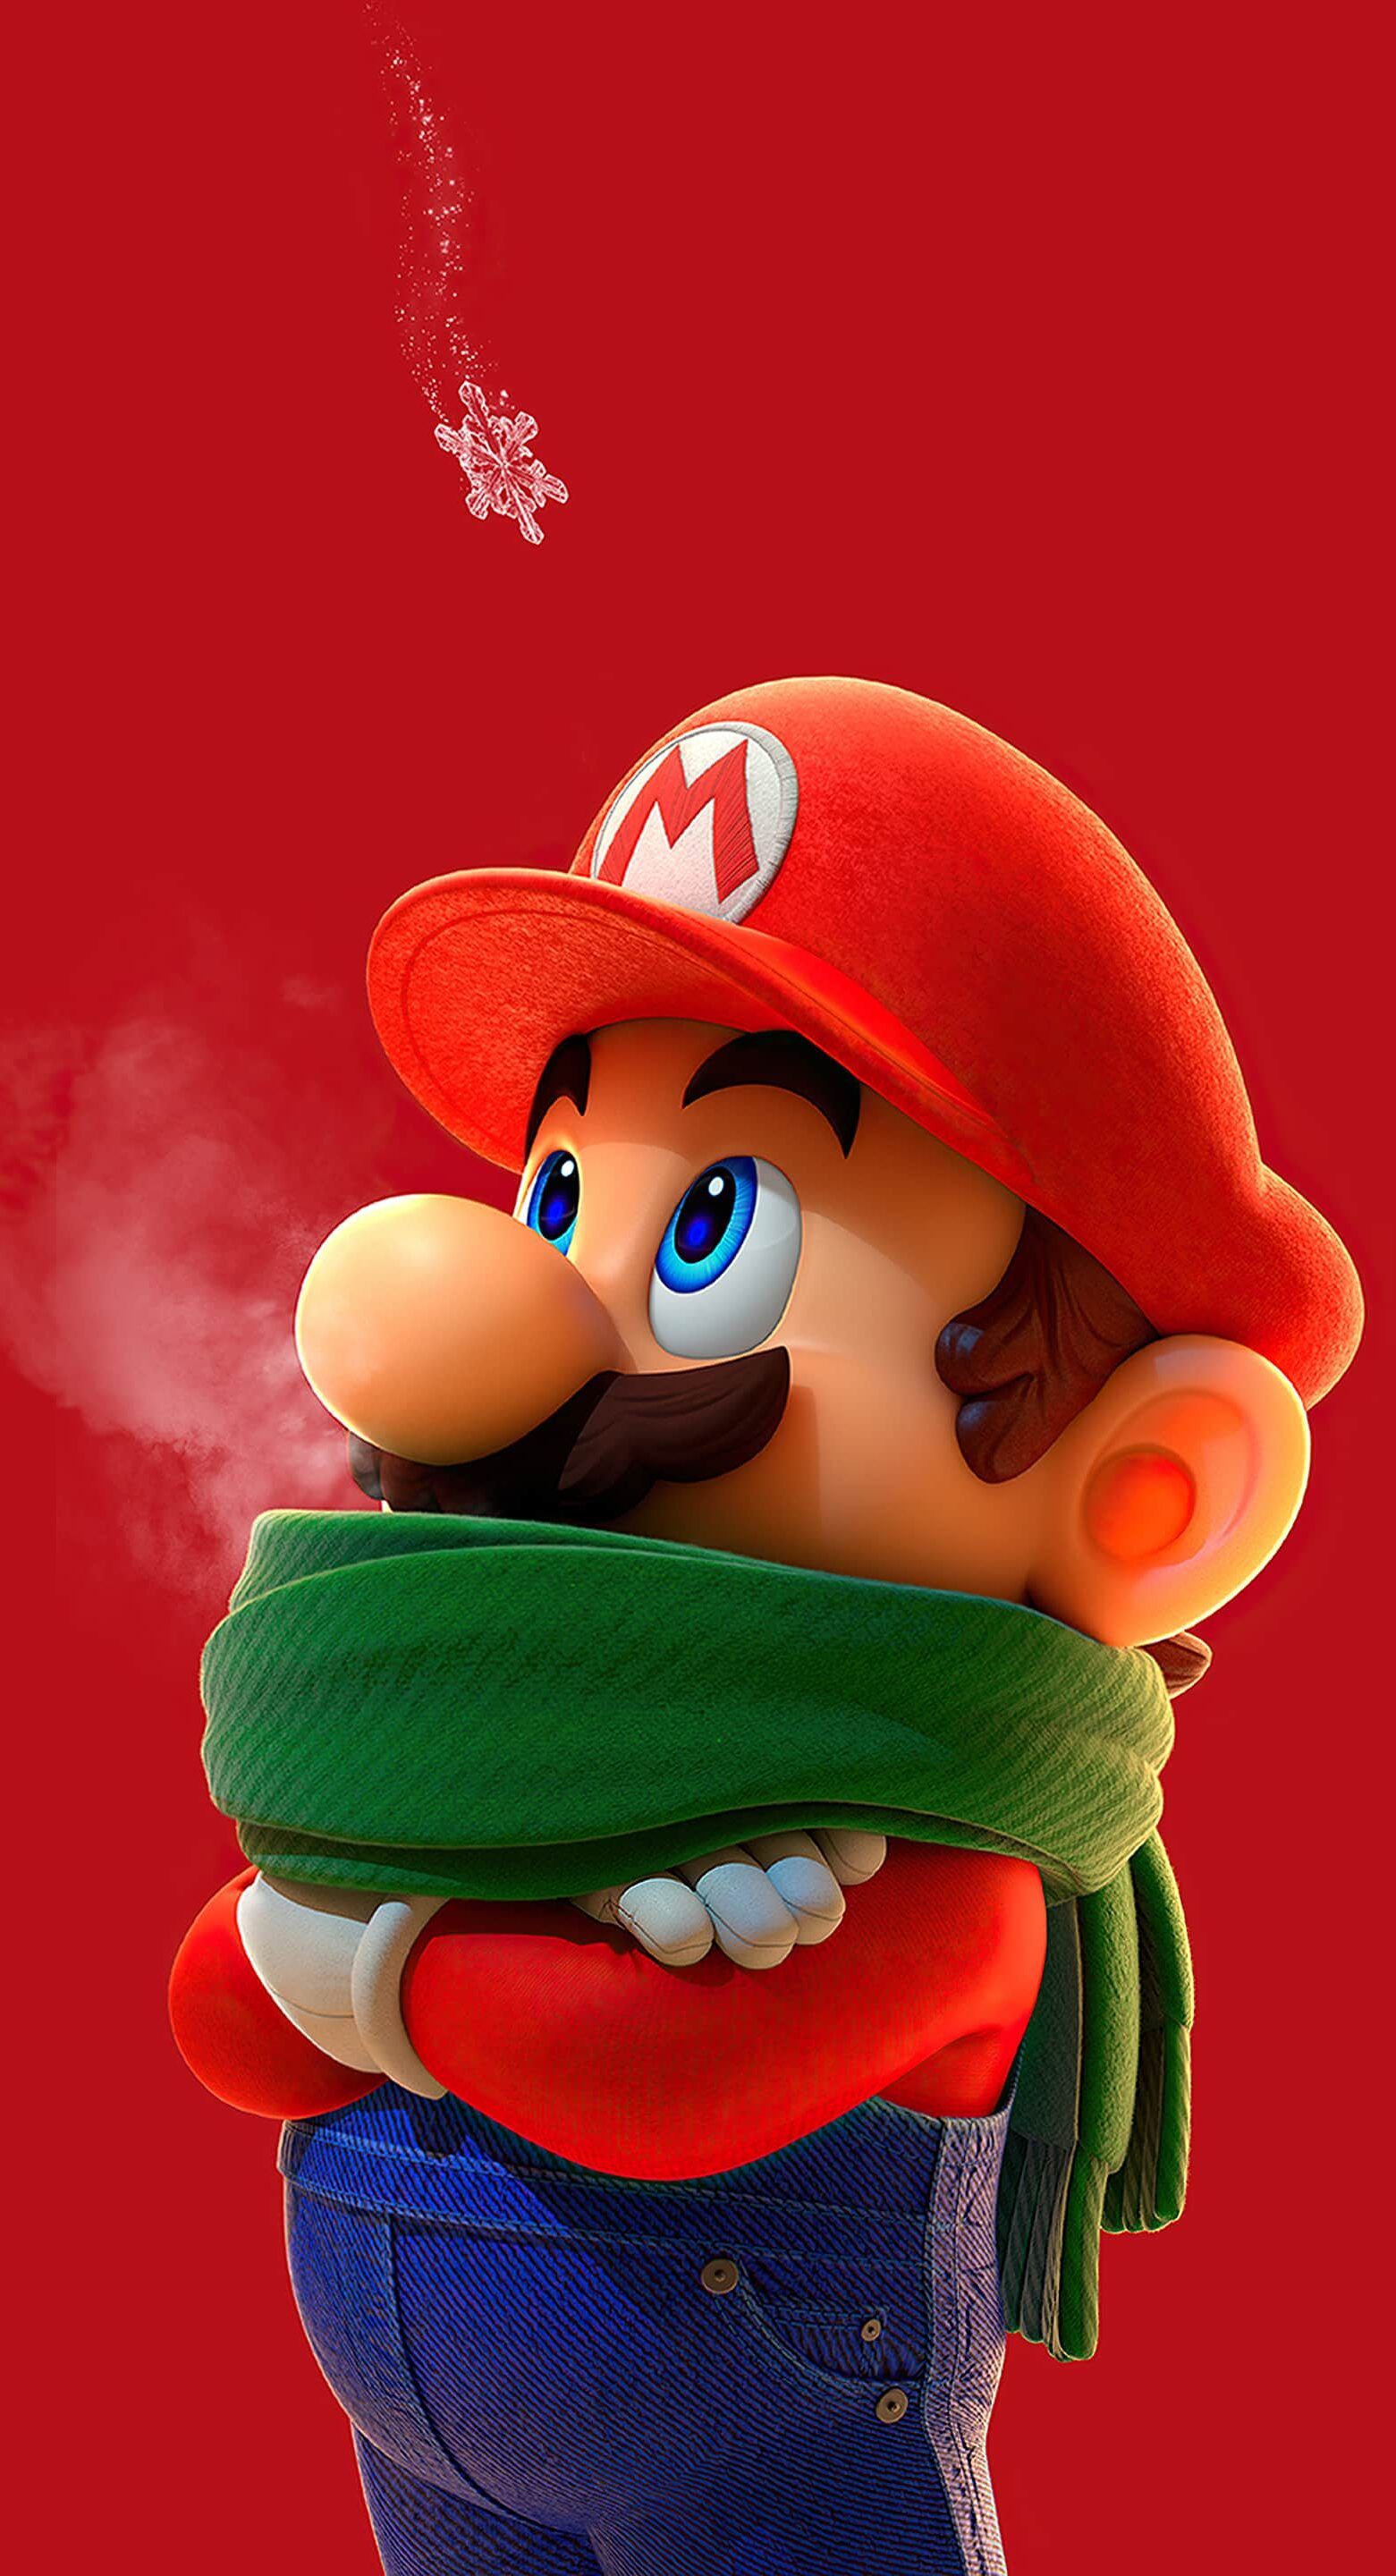 Mario Wallpaper Discover more background, cool, high resolution, ipad, iphone wallpaper.. Super mario bros nintendo, Super mario and luigi, Super mario bros